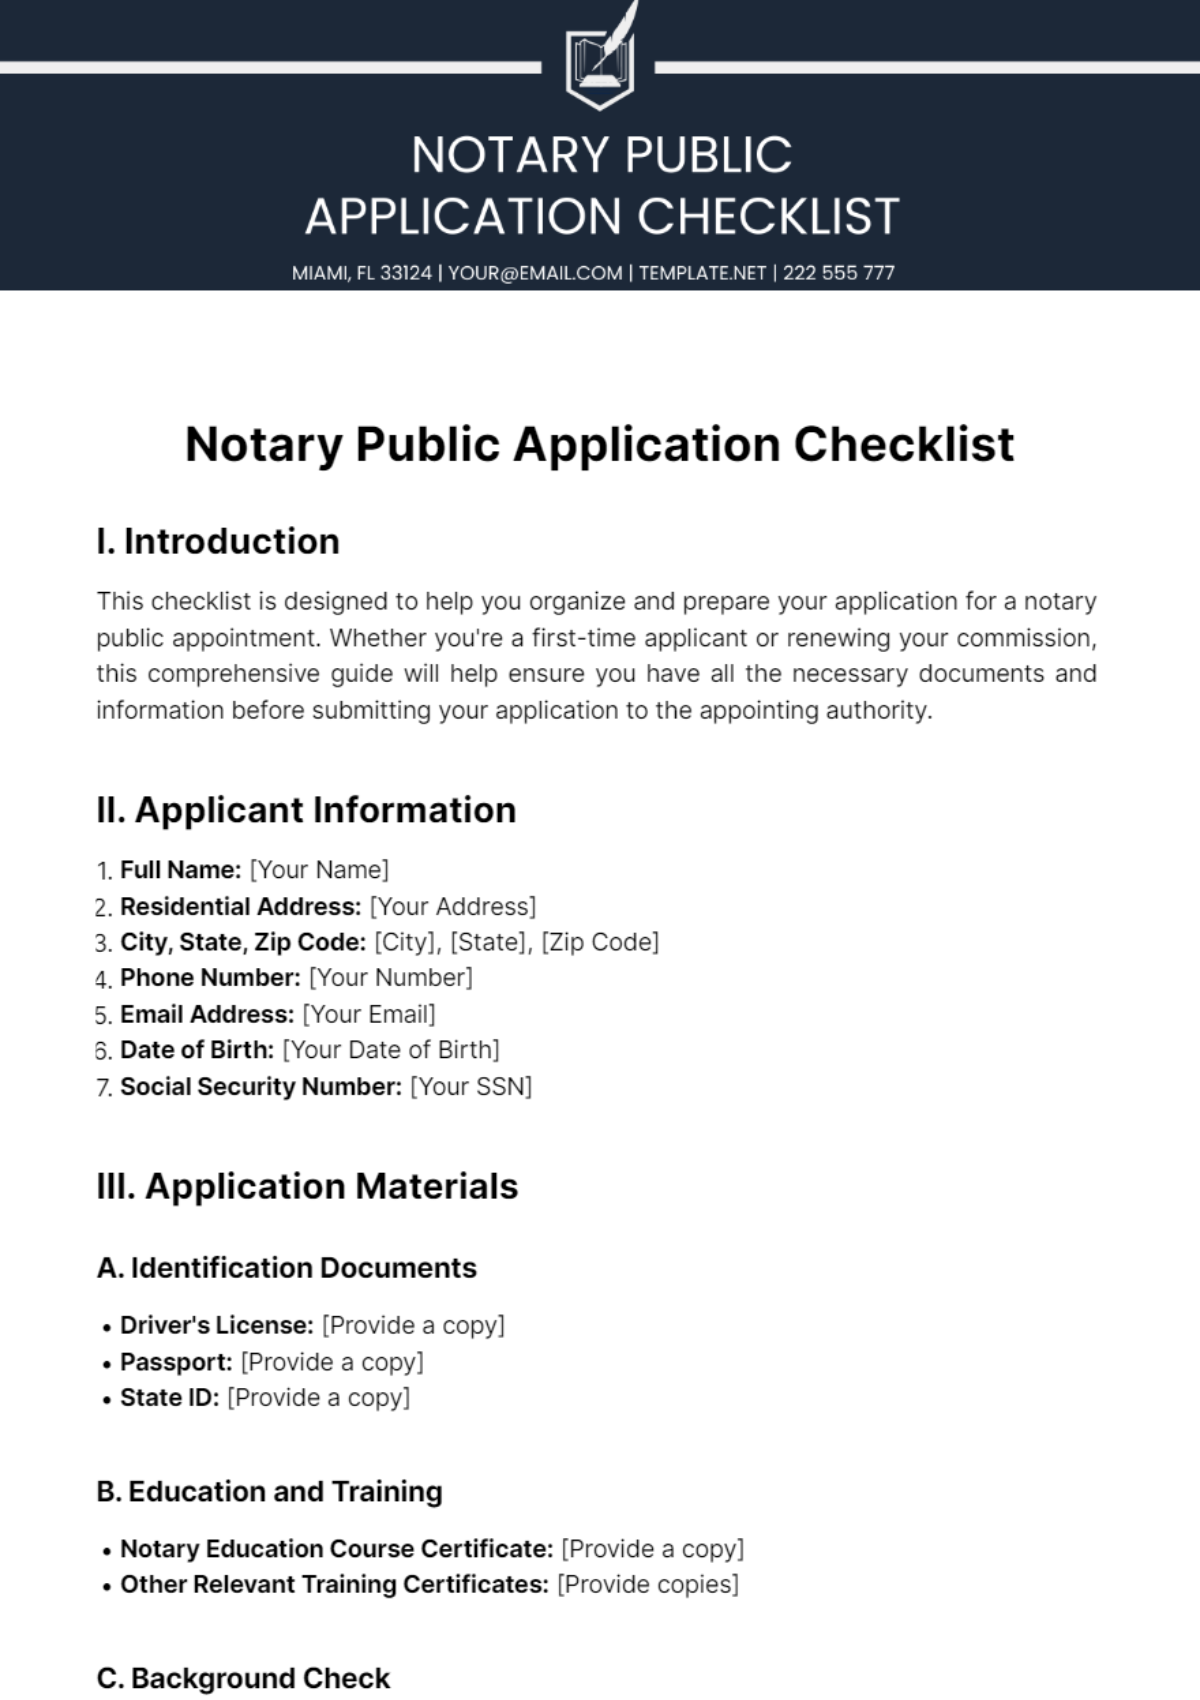 Free Notary Public Application Checklist Template